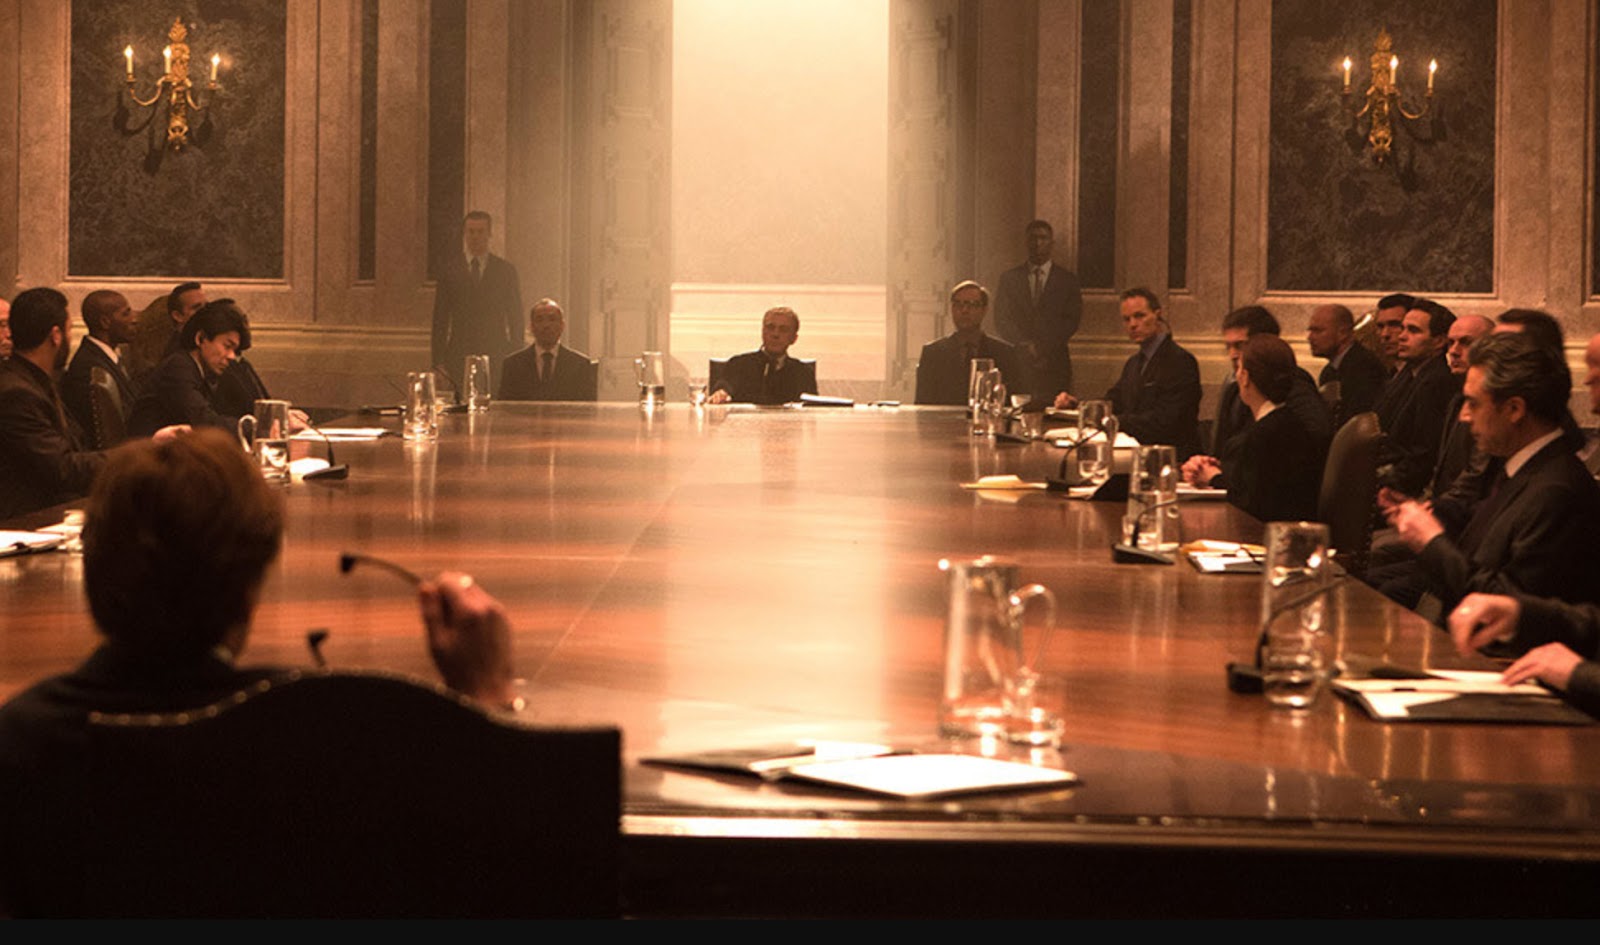 A board meeting for Spectre, Bond's evil arch enemy